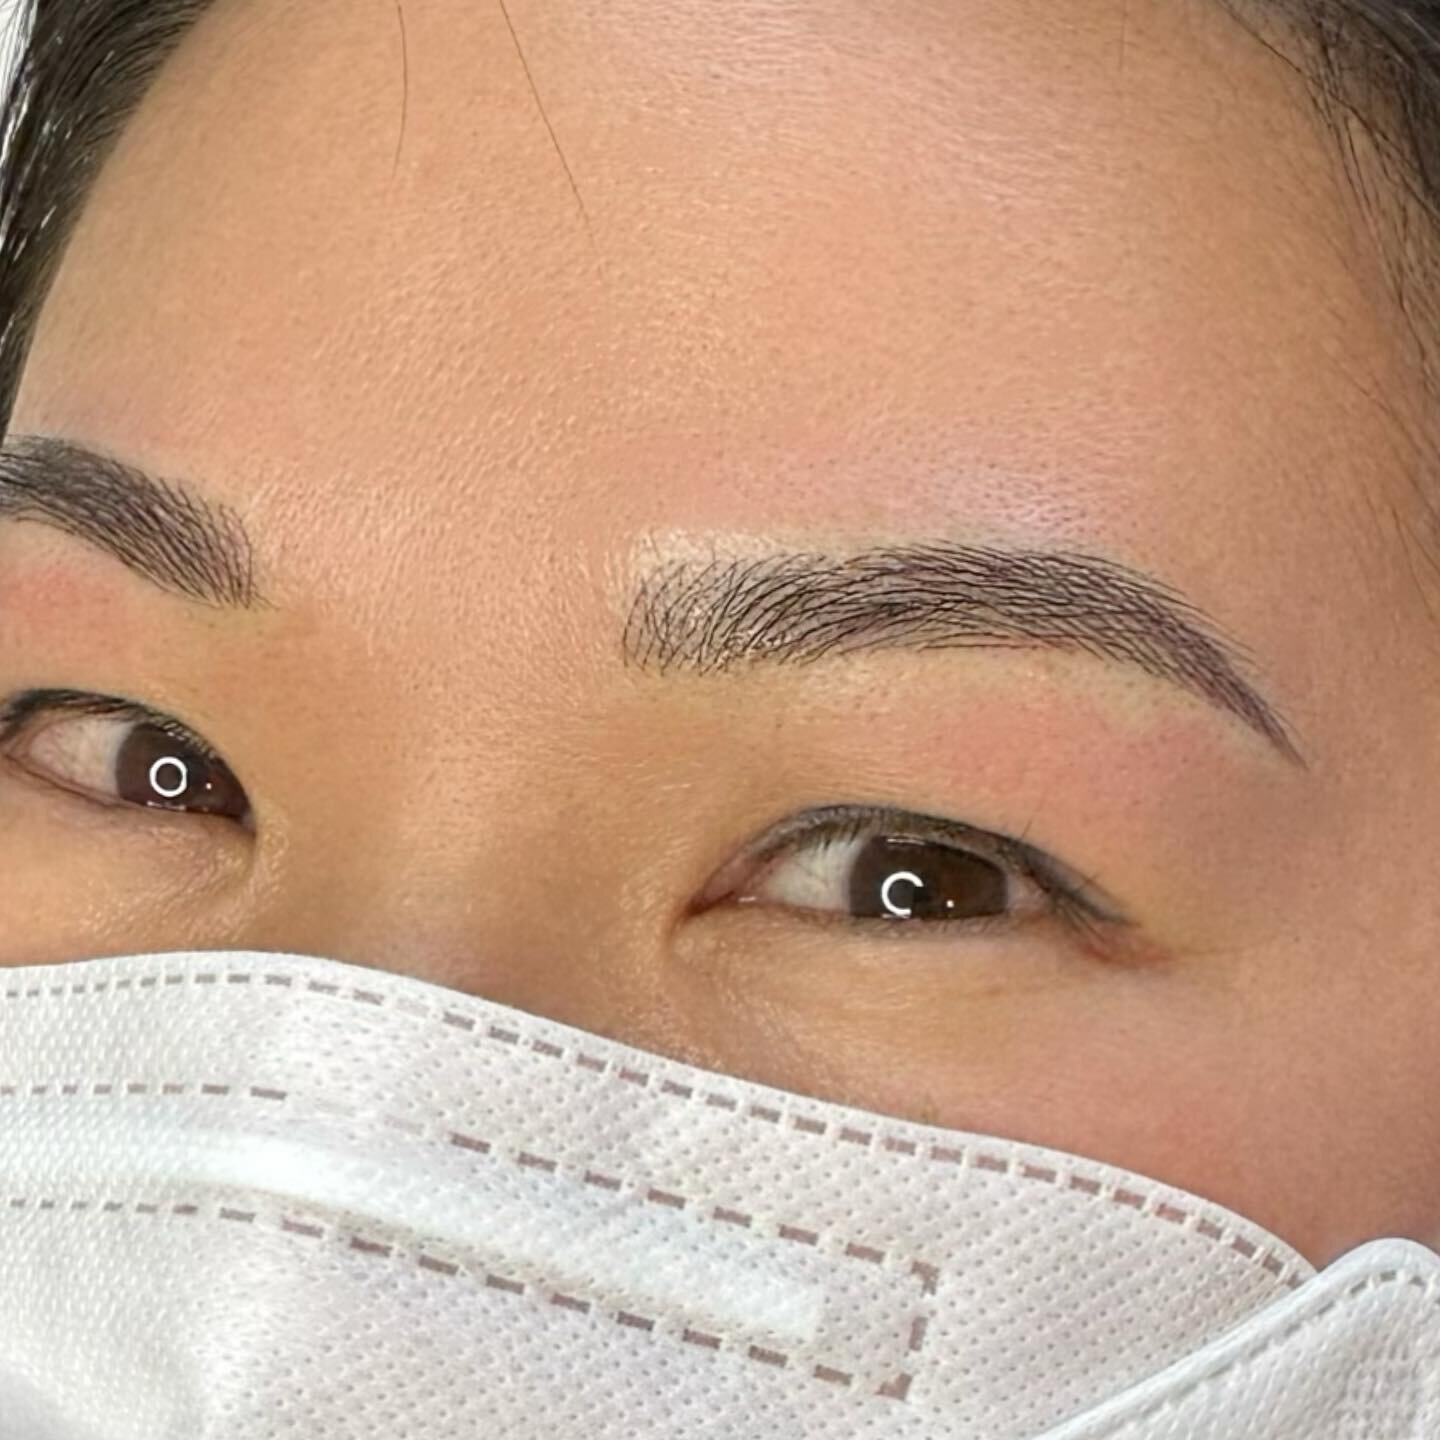 Officially back from maternity leave 🤗 So happy to be feathering brows and eyeliners again! #nanobrows #nanofeathering 
&mdash;
Skin type: Oily
Technique: Nano Feather Brows
Pain level: None
Appointment time: 2 hours
Sessions: 2 required
Healing tim